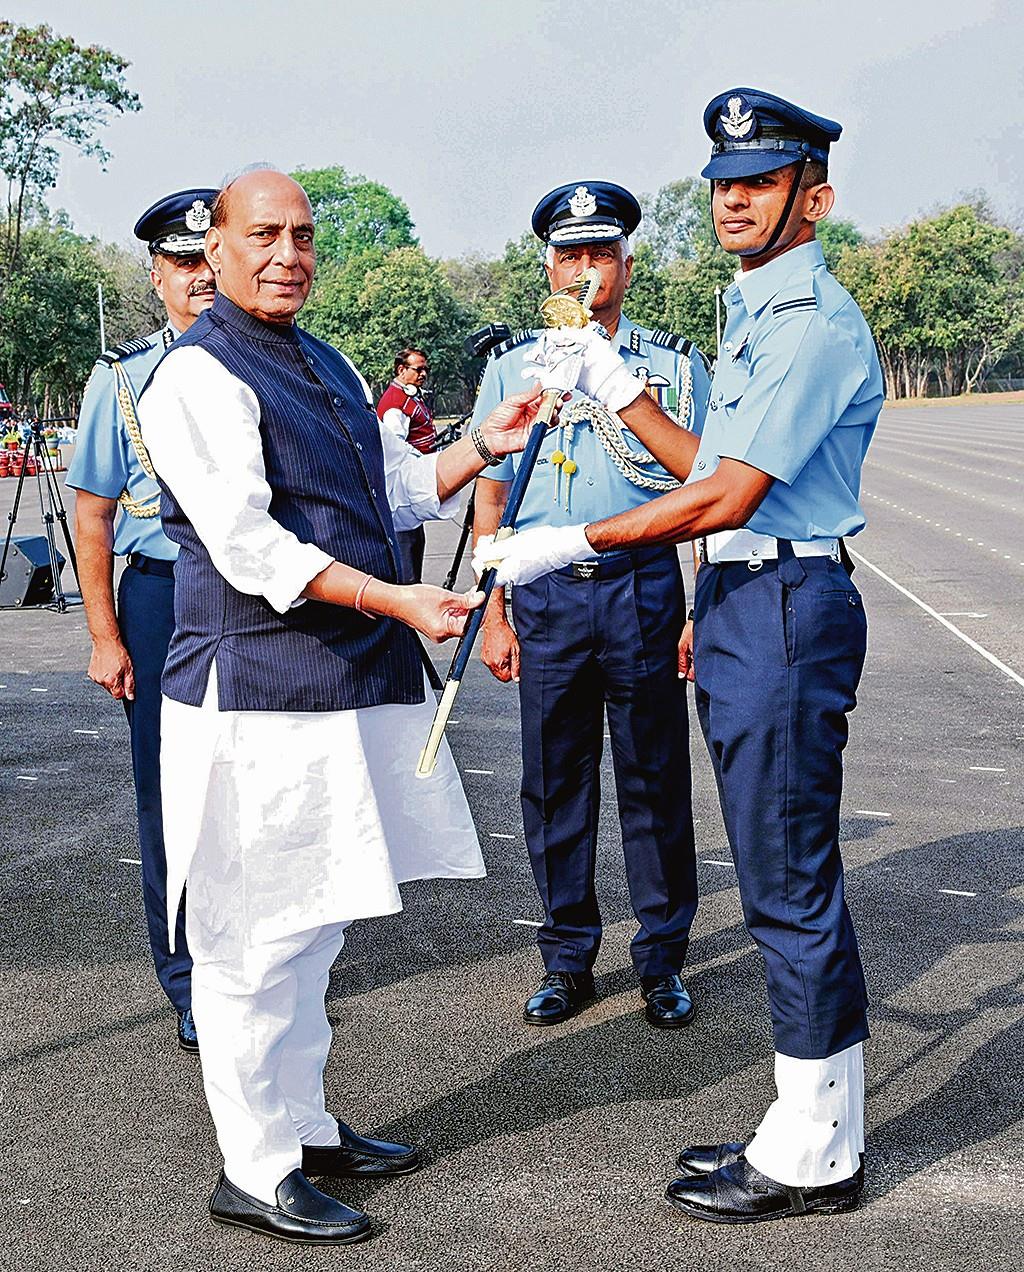 Reaching for the sky: Haryana, Punjab IAF cadets pass out with flying colours